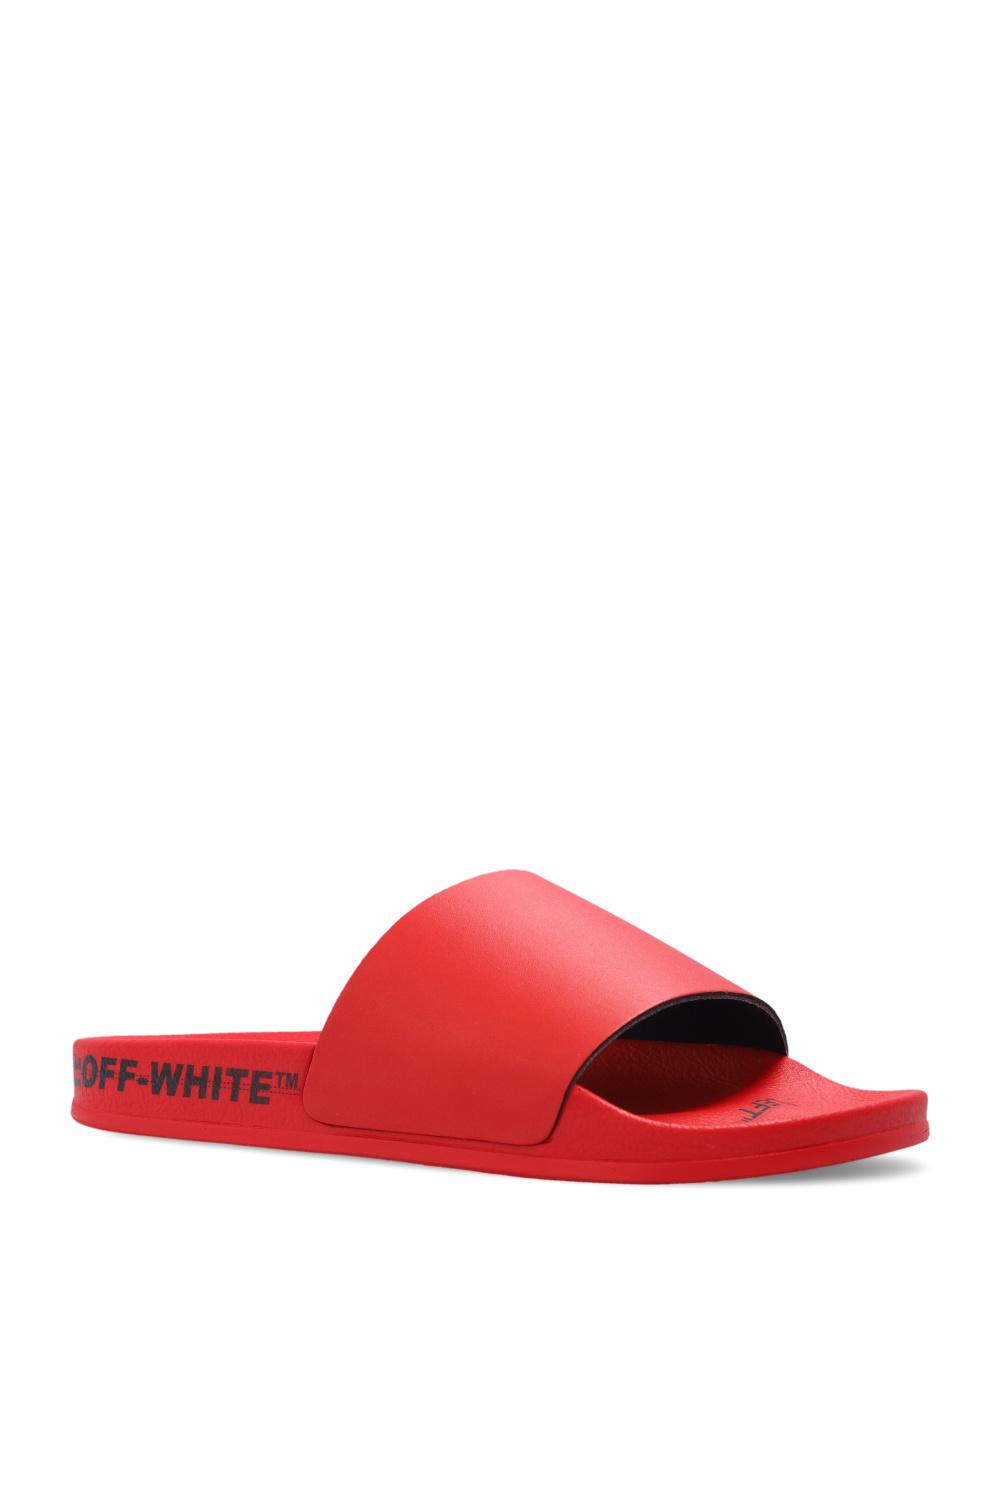 Virgil Abloh's Red Slides Part 3- Analogies & Insert Yourself Here 